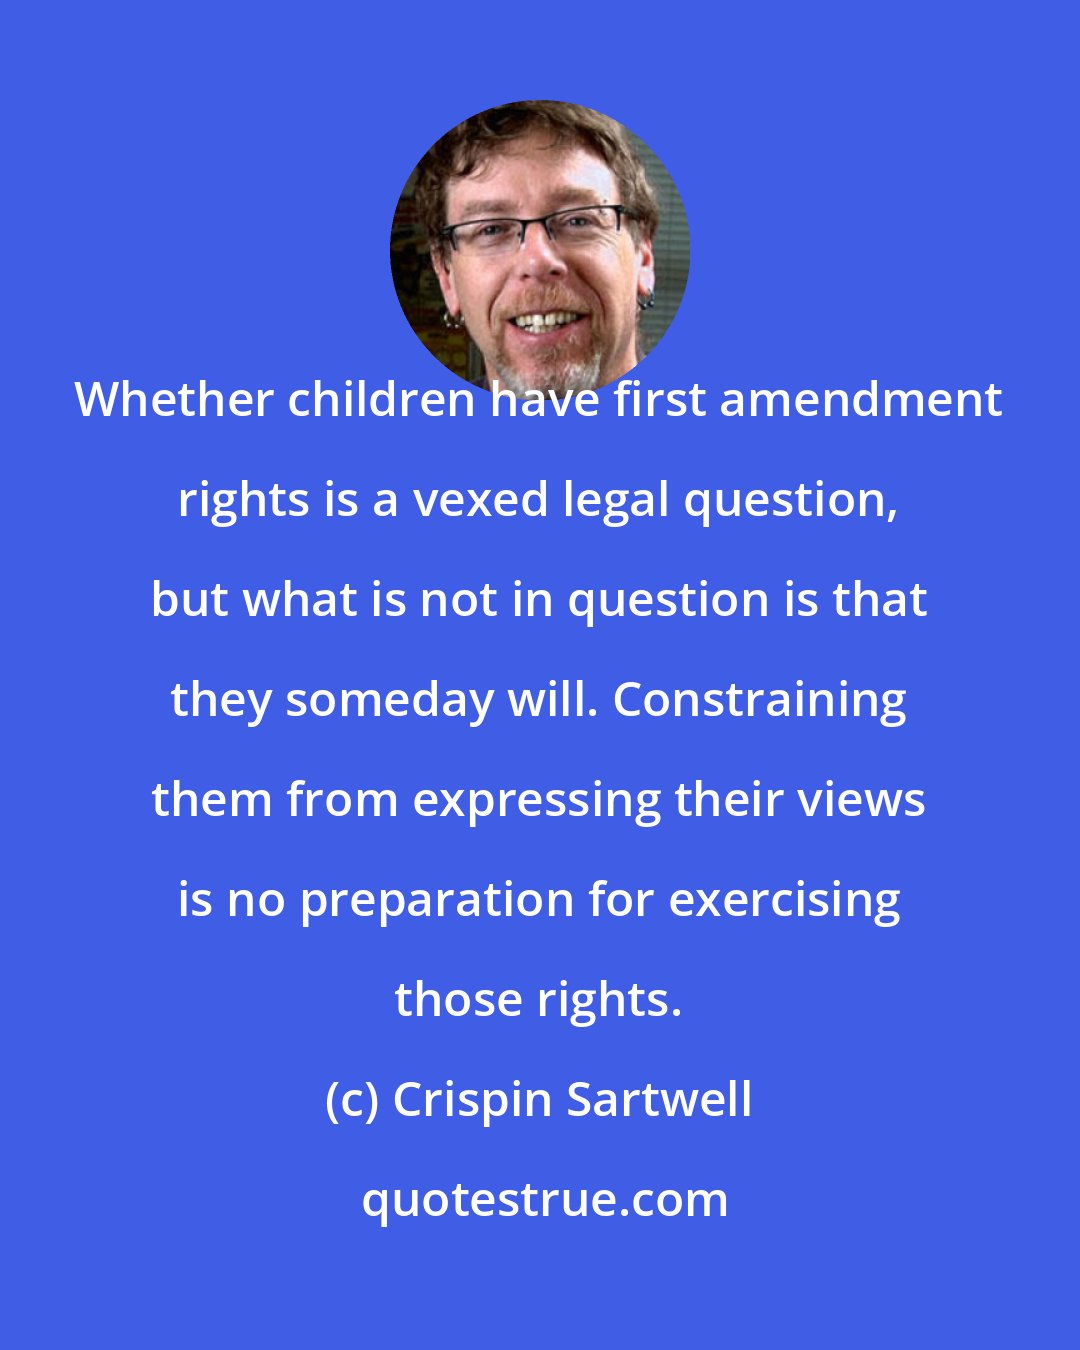 Crispin Sartwell: Whether children have first amendment rights is a vexed legal question, but what is not in question is that they someday will. Constraining them from expressing their views is no preparation for exercising those rights.